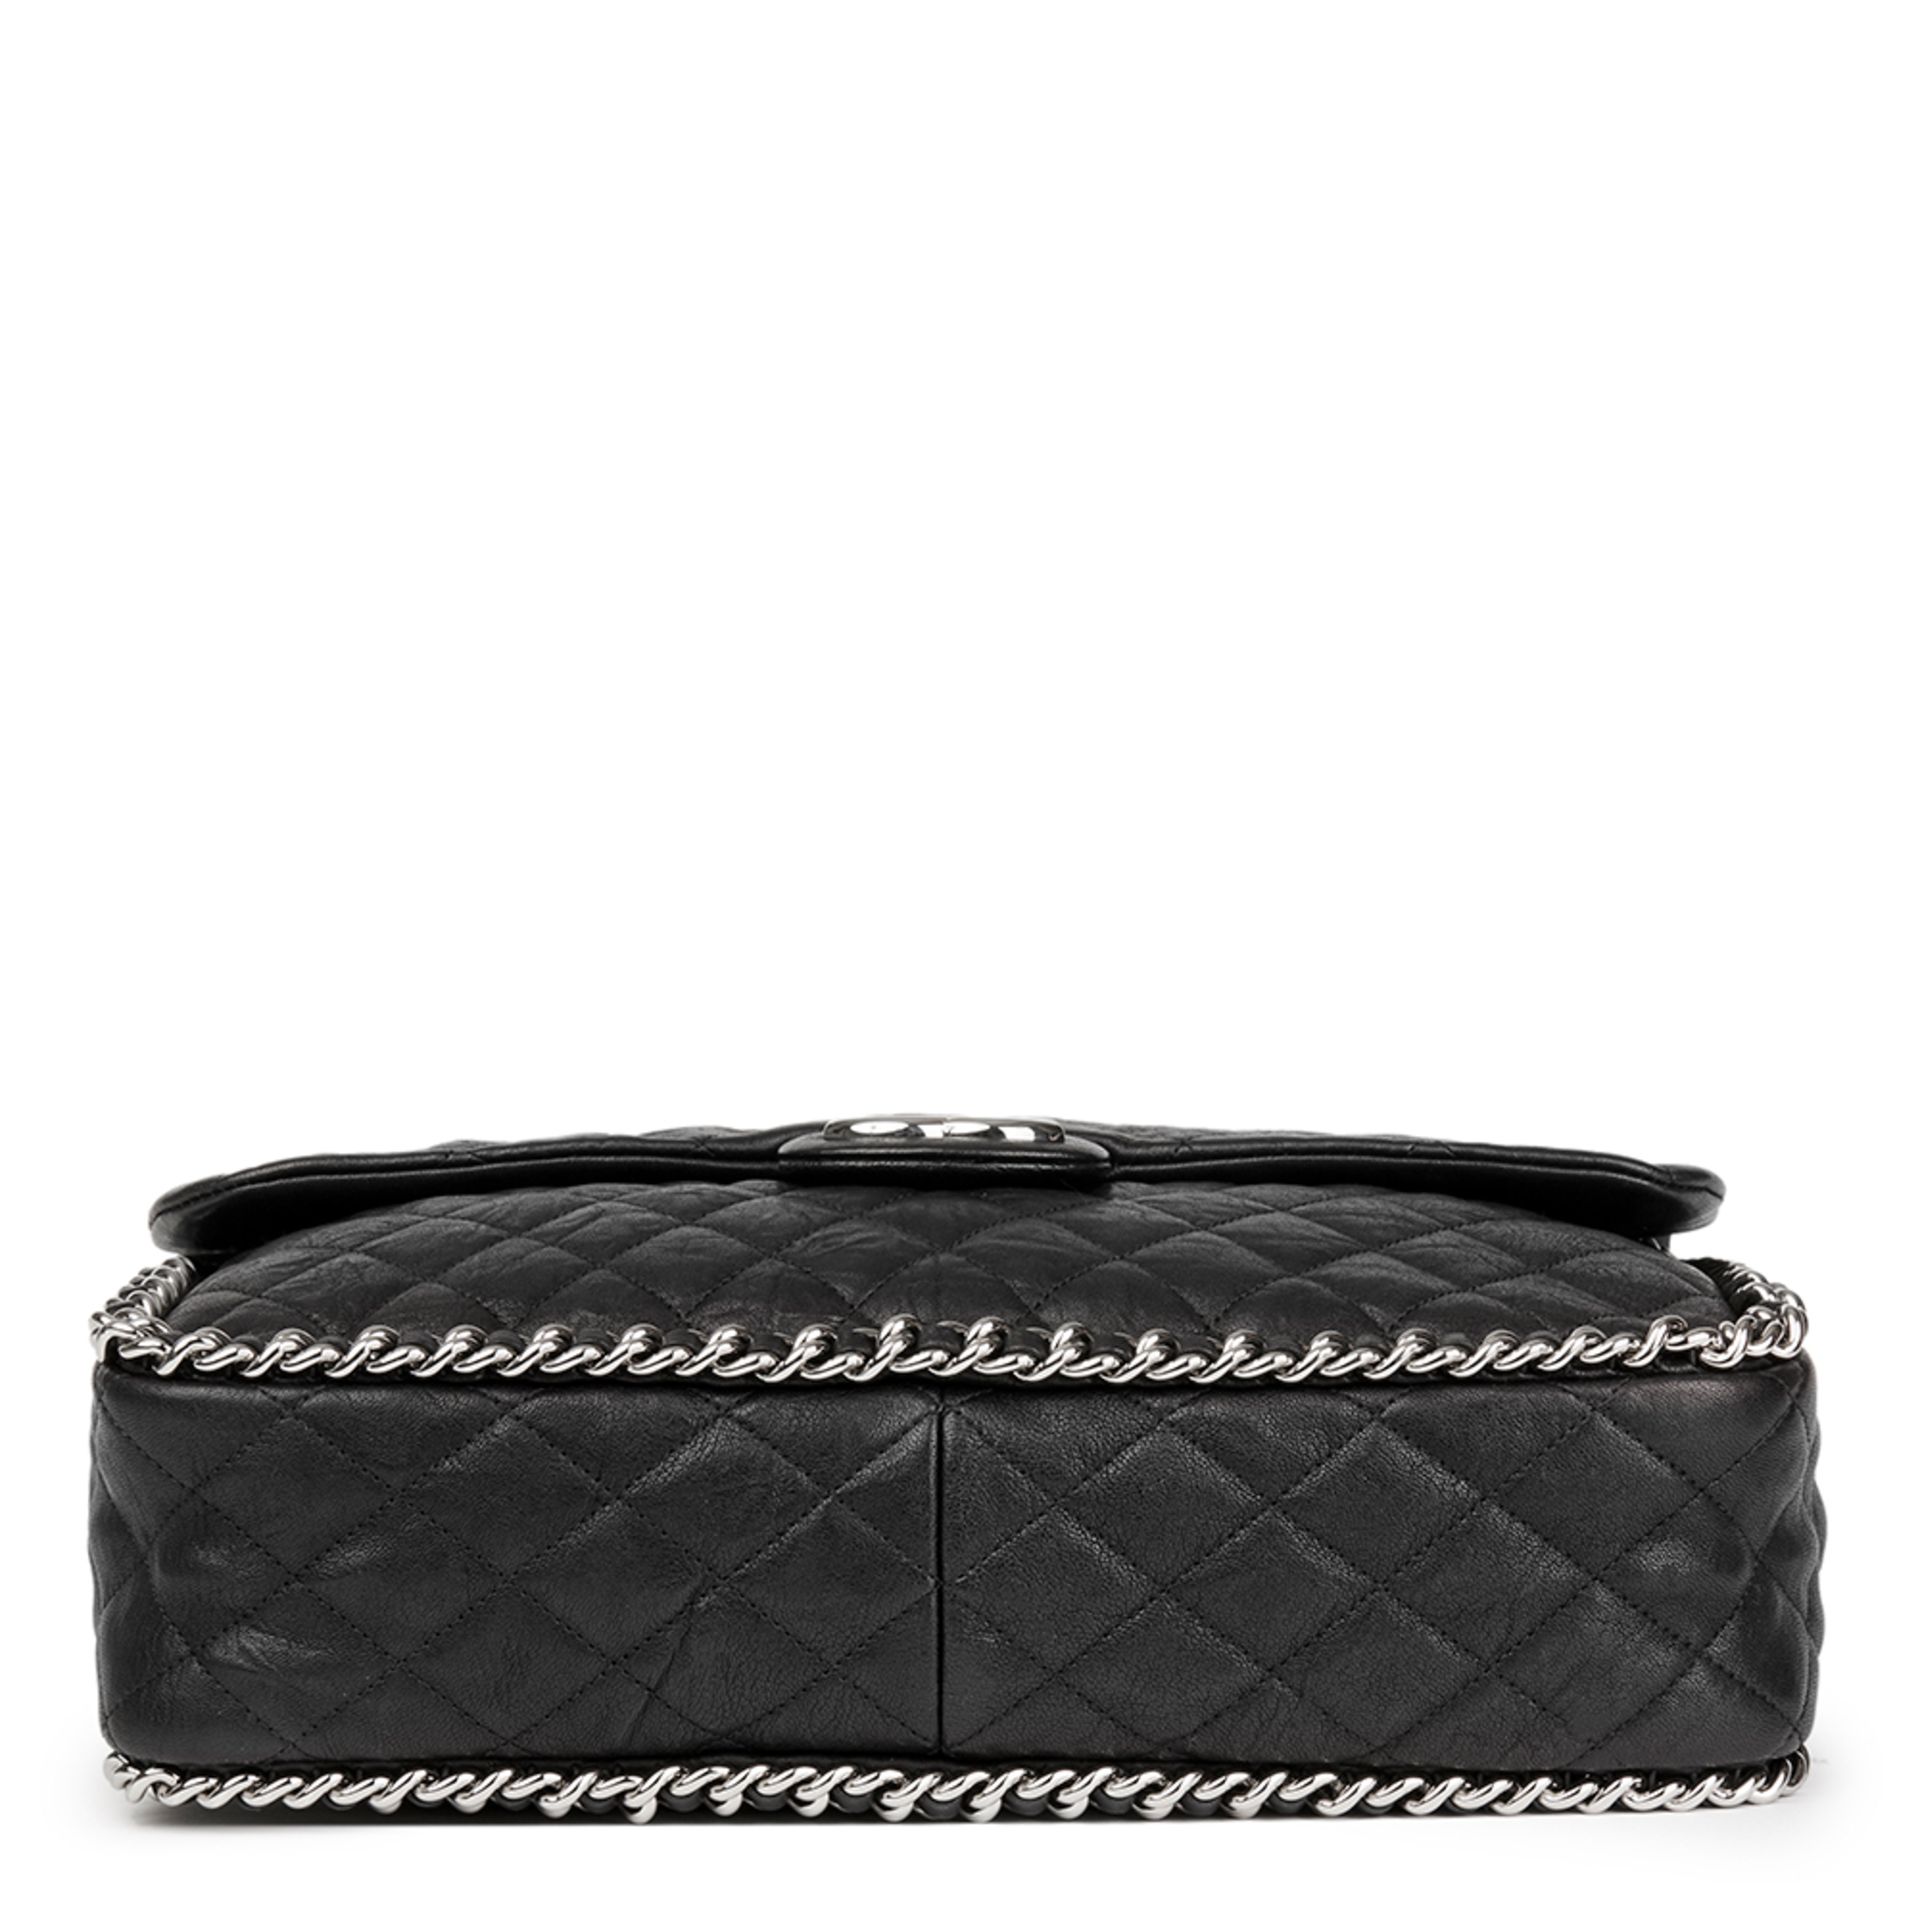 Chanel Black Quilted Calfskin Chain Around Maxi Flap Bag - Image 5 of 10